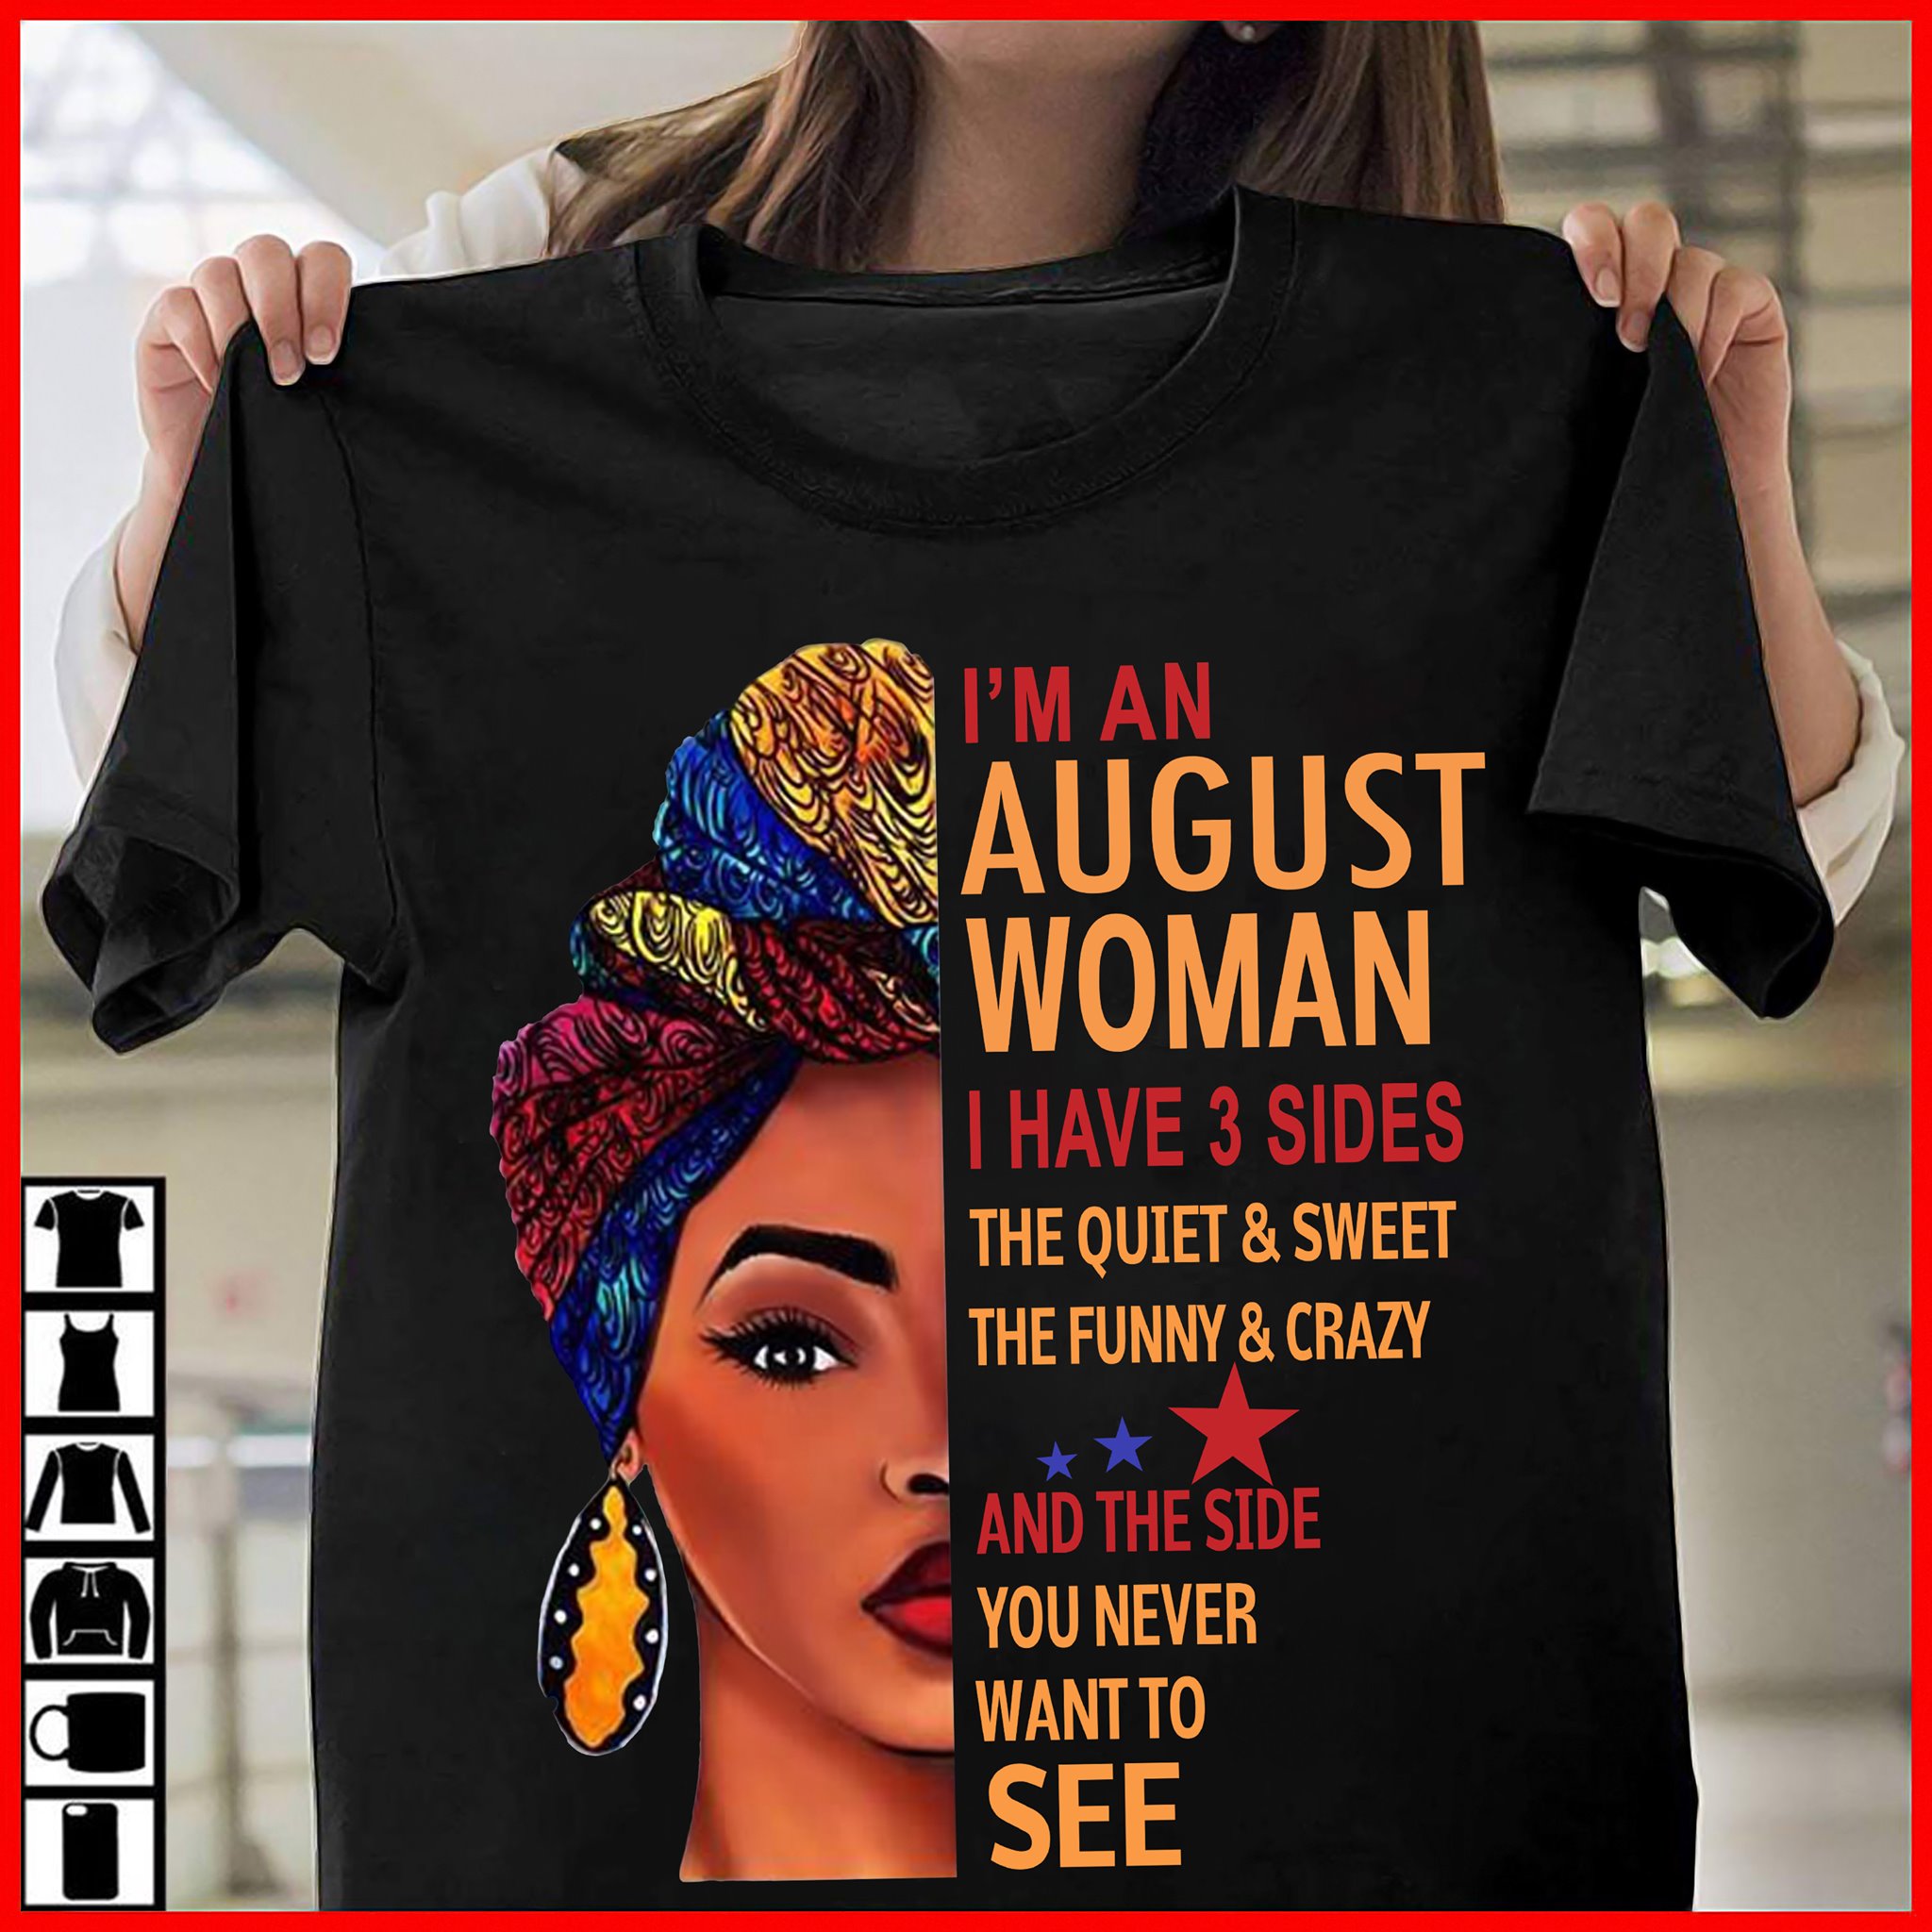 Im an august woman I have 3 sides the quiet, sweet the funny, crazy and the side you never want to see